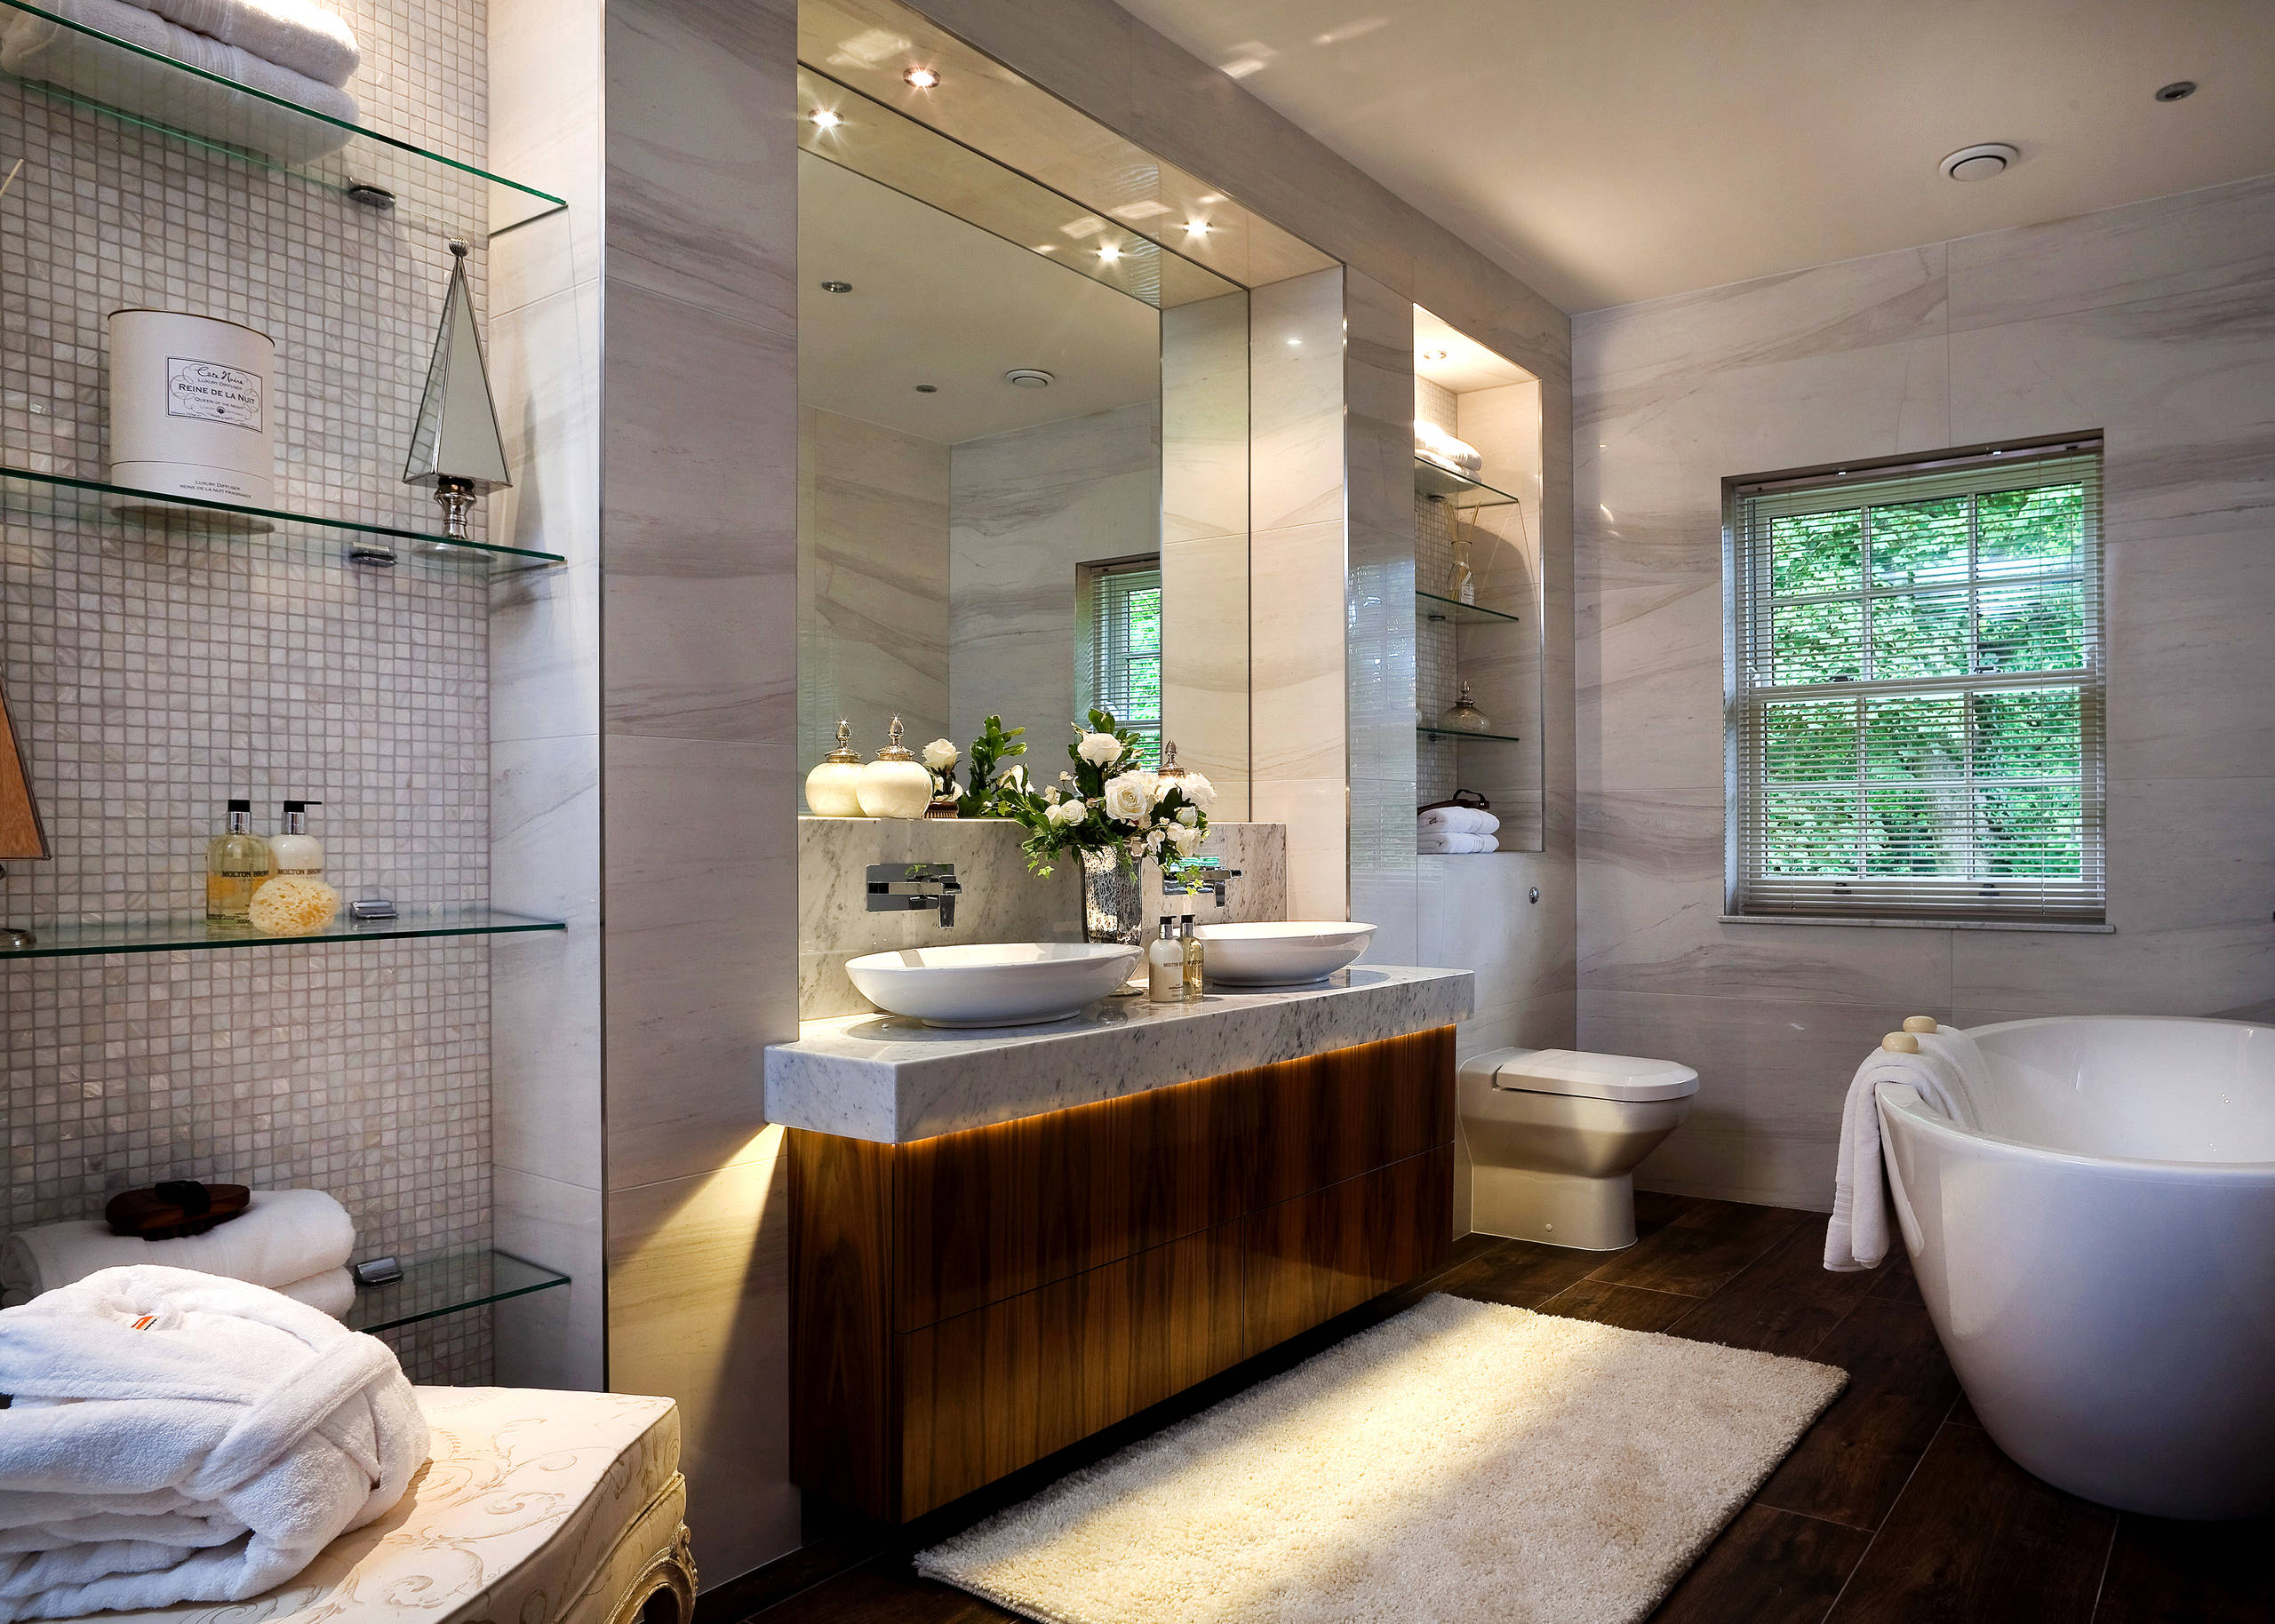 Cost Of Your Bathroom Renovation, How Much To Renovate A Small Bathroom Uk